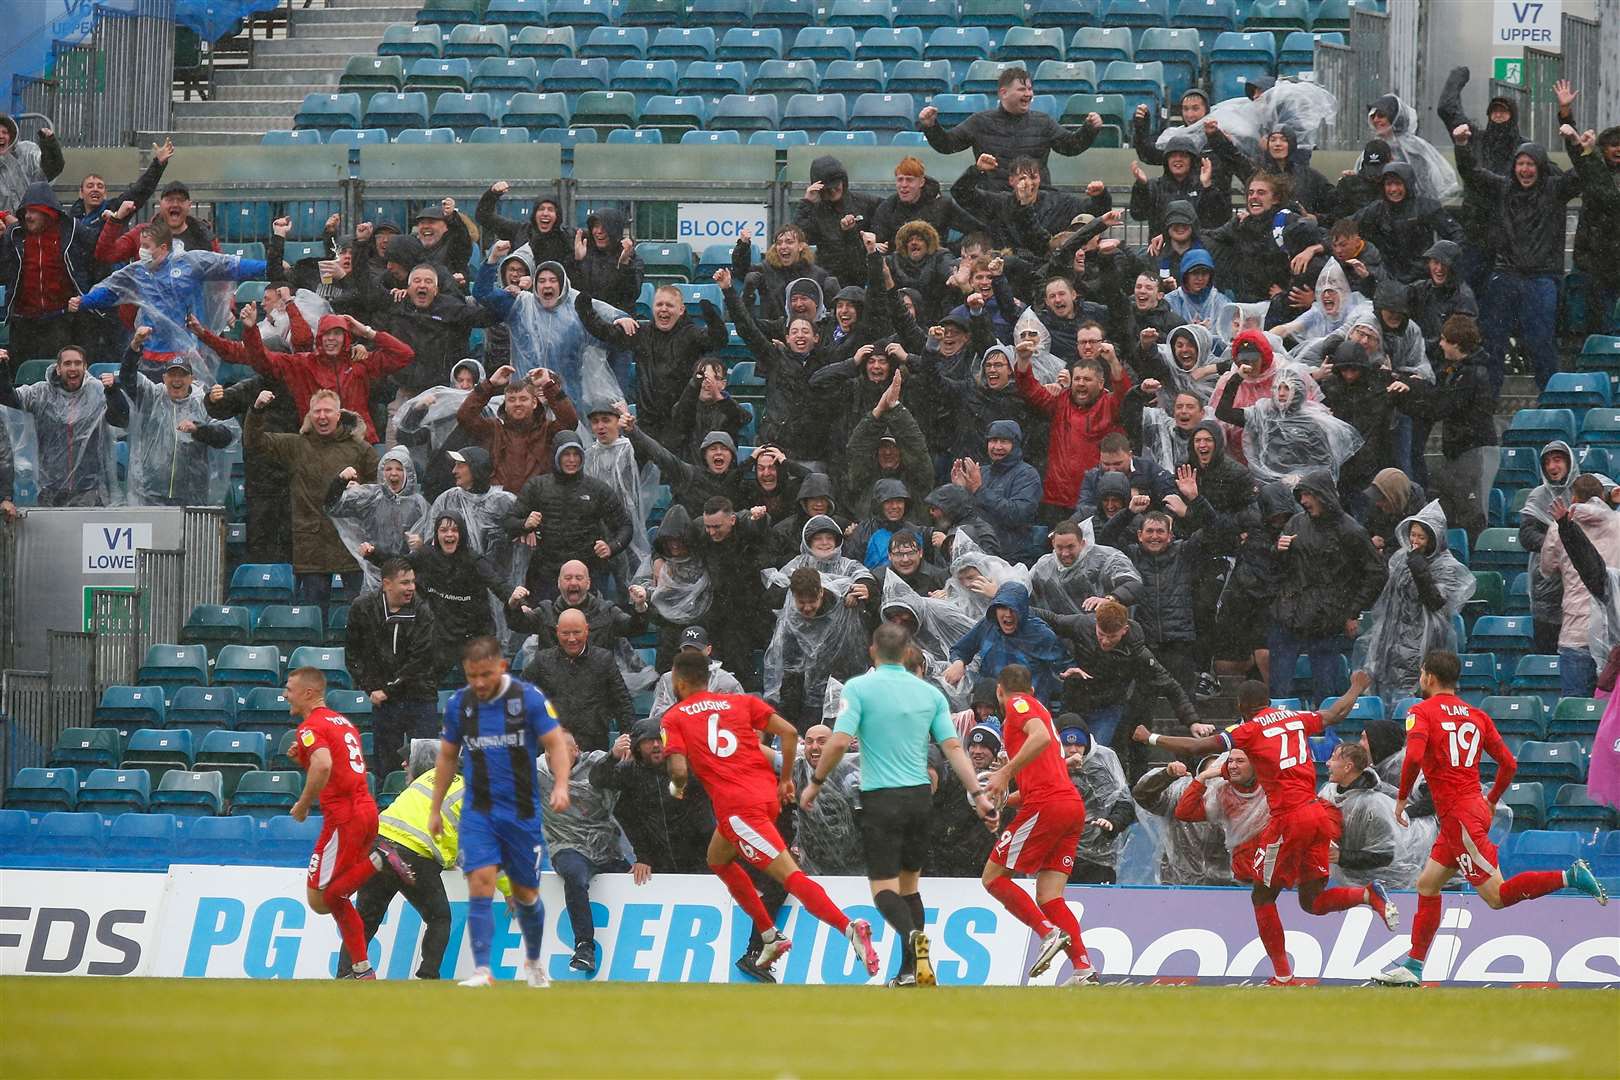 Wigan score their first goal Picture: Andy Jones